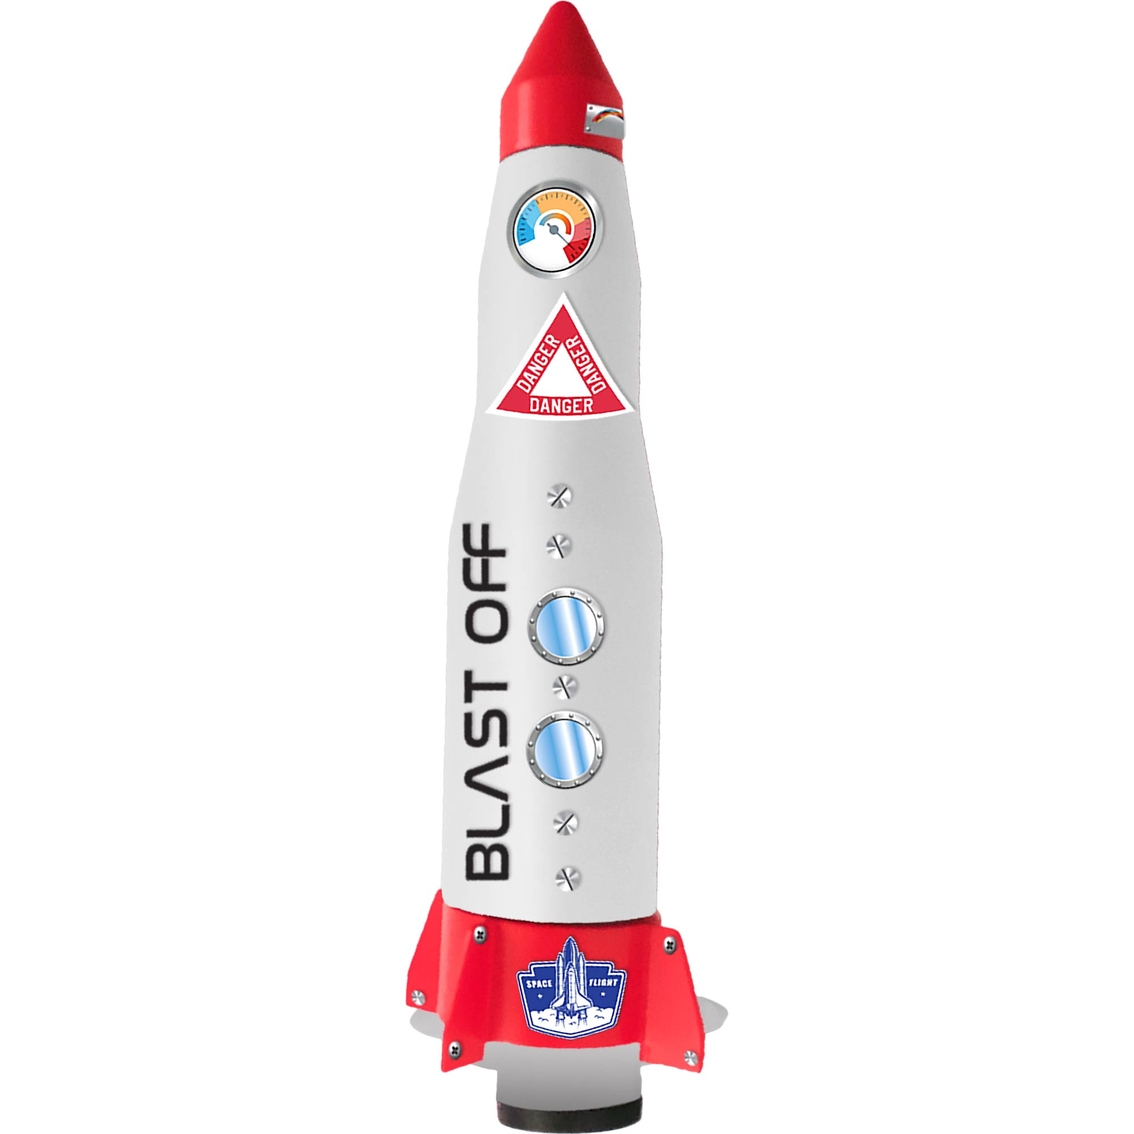 Discovery Propulsion Rocket Kit - Image 3 of 3